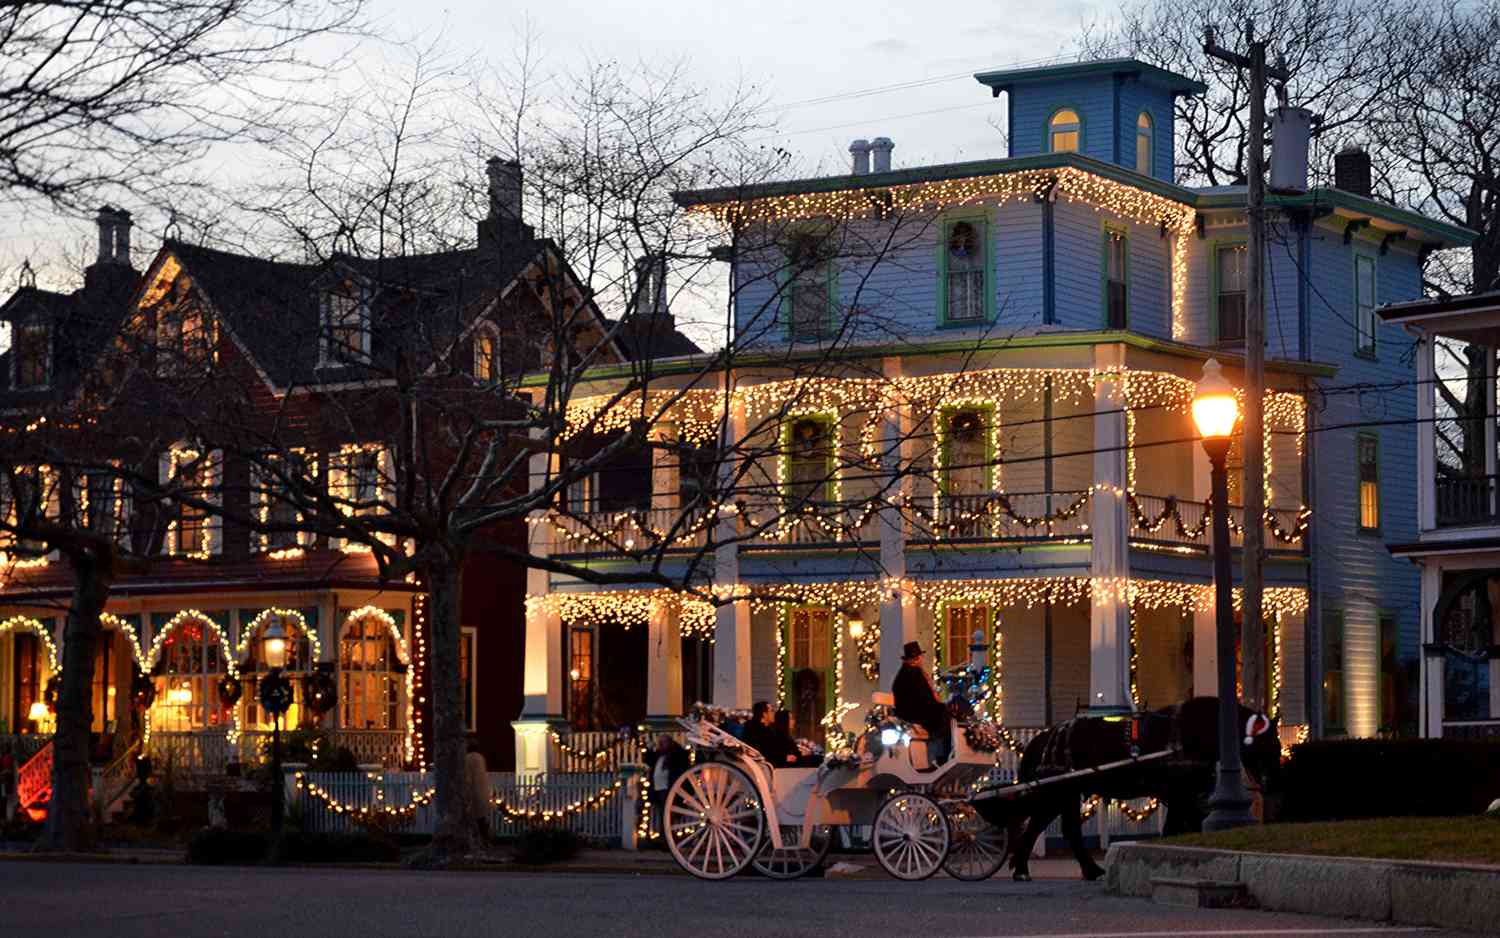 The Most Amazing Old-Fashioned Christmas Town Is Right In New Jersey